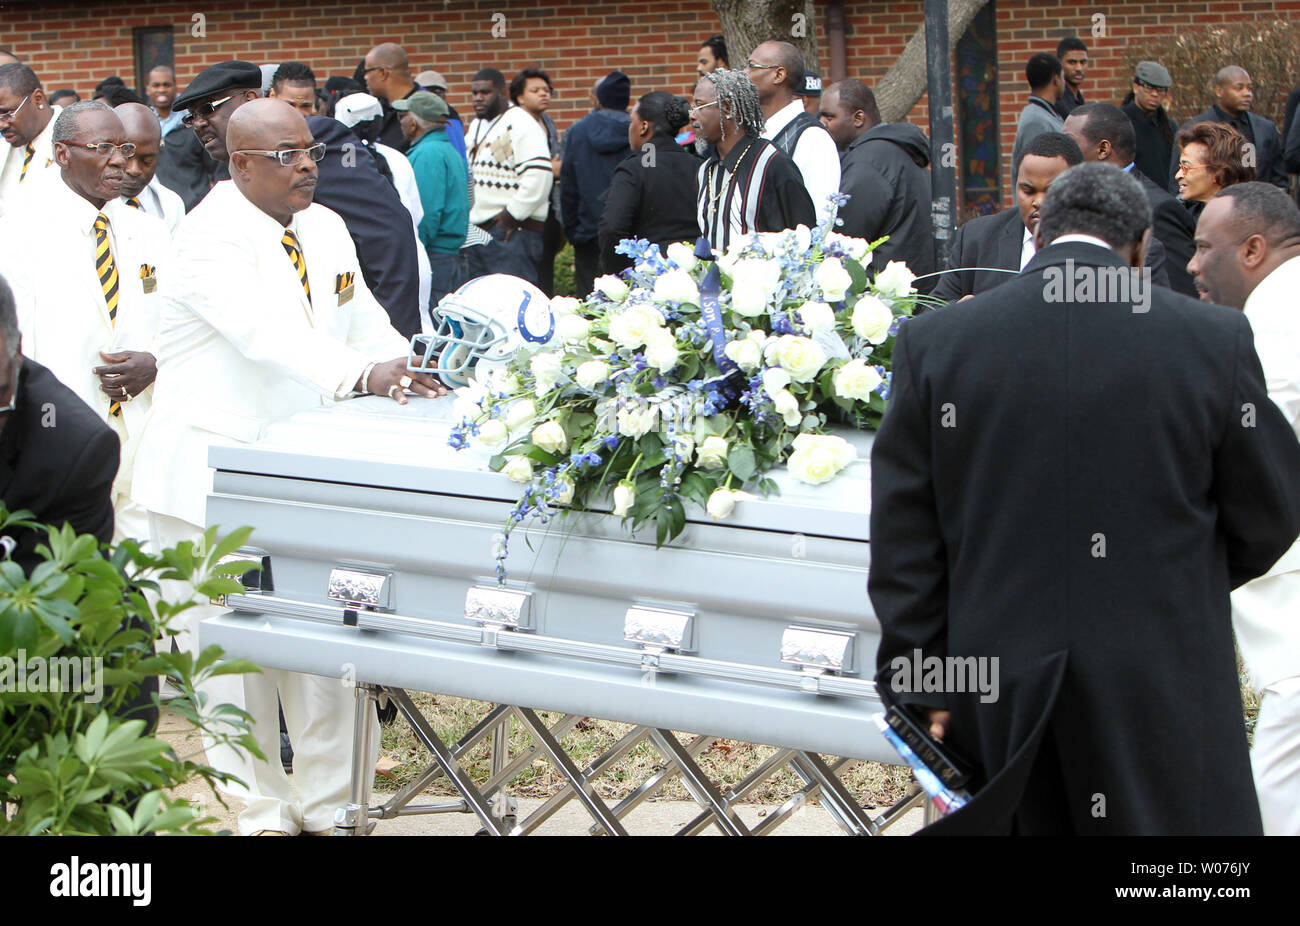 Officials wheel the casket of Jerry Brown, Jr. to a waiting hearse during his funeral at the Hopewell Missionary Baptist Church in St. Louis on December 15, 2012. The Dallas CowboysÕ practice squad nose tackle was killed in an Irving car accident on December 8, 2012 when his best friend and teammate Josh Brent hit a curb, flipping the vehicle.    UPI/Bill Greenblatt Stock Photo